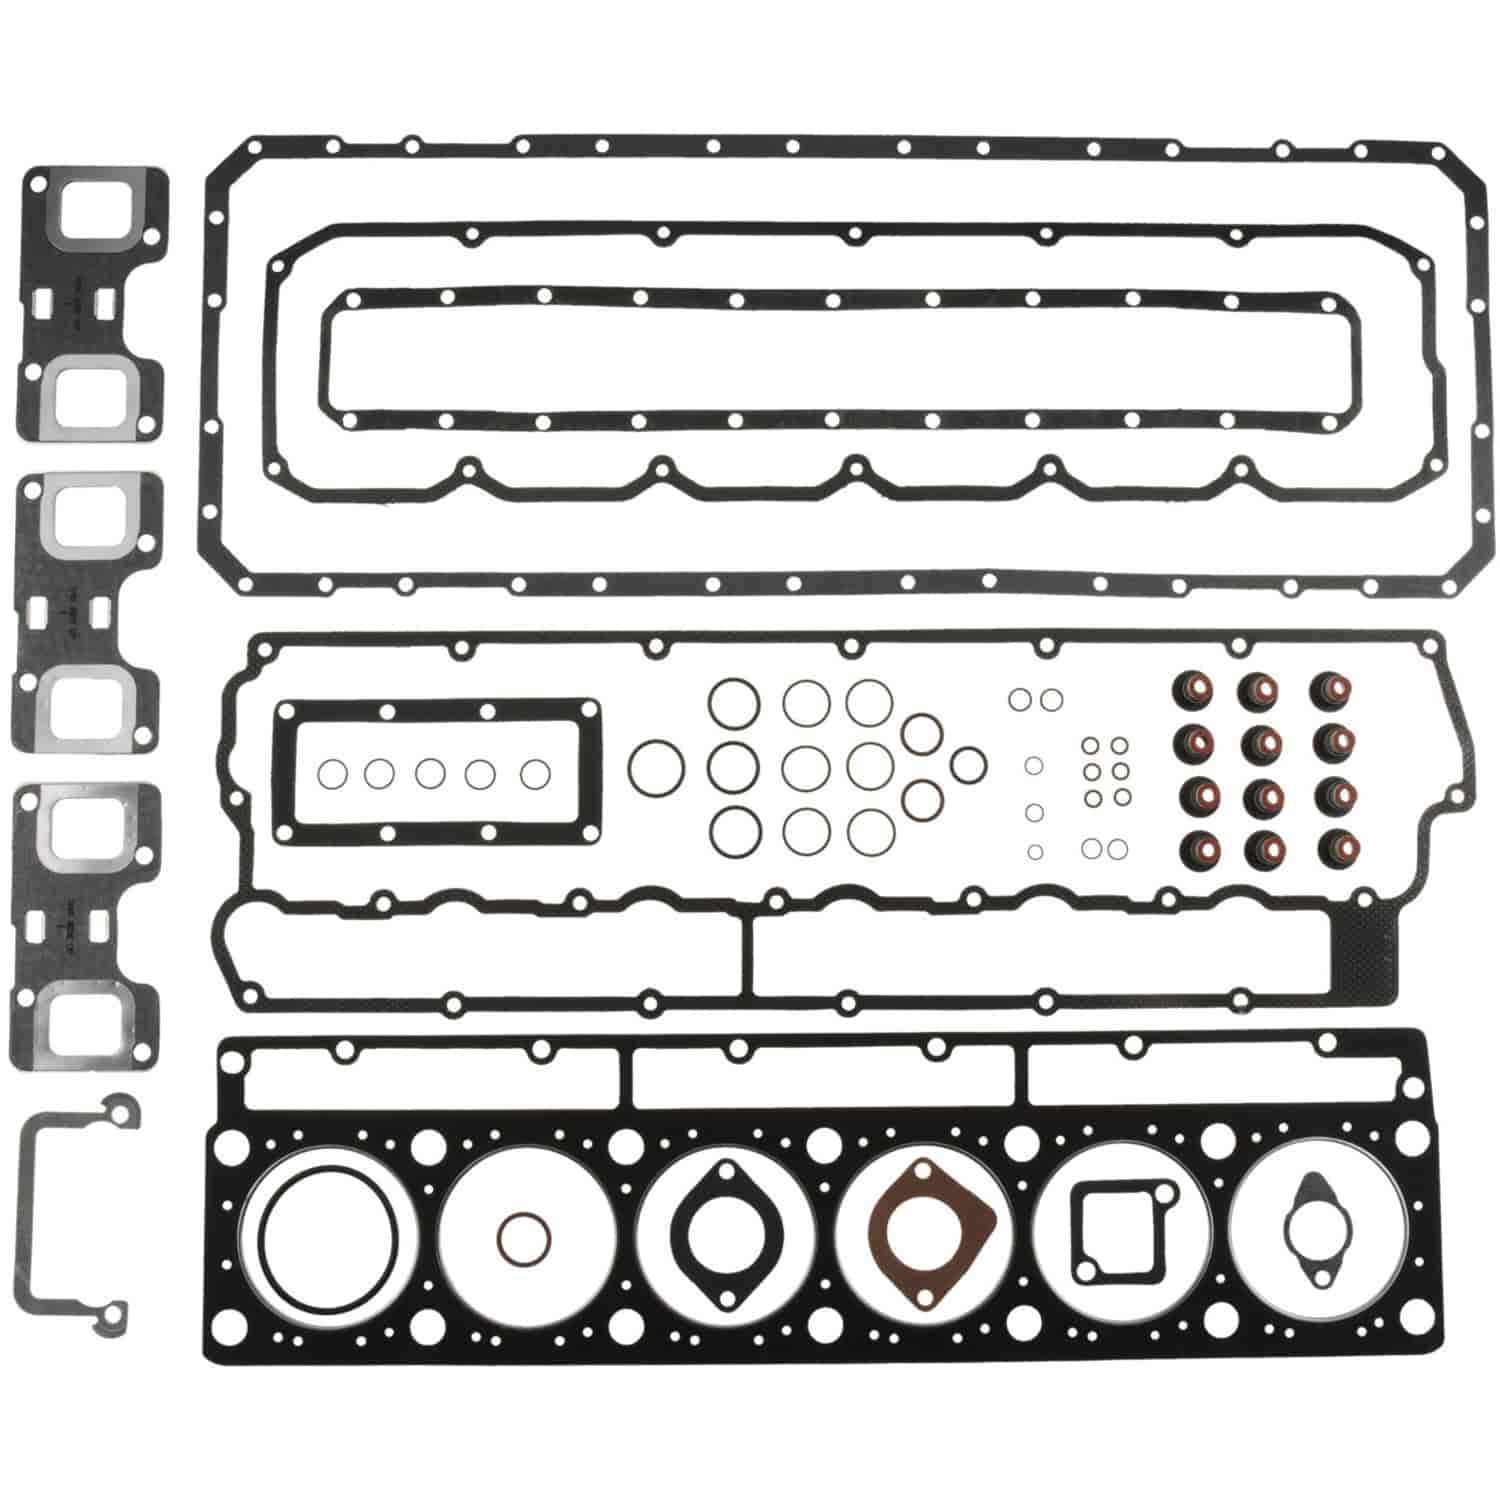 In-Frame Overhaul Set Caterpillar 3116 Non Cover Plate Engine - Pan Set OE# 2613816